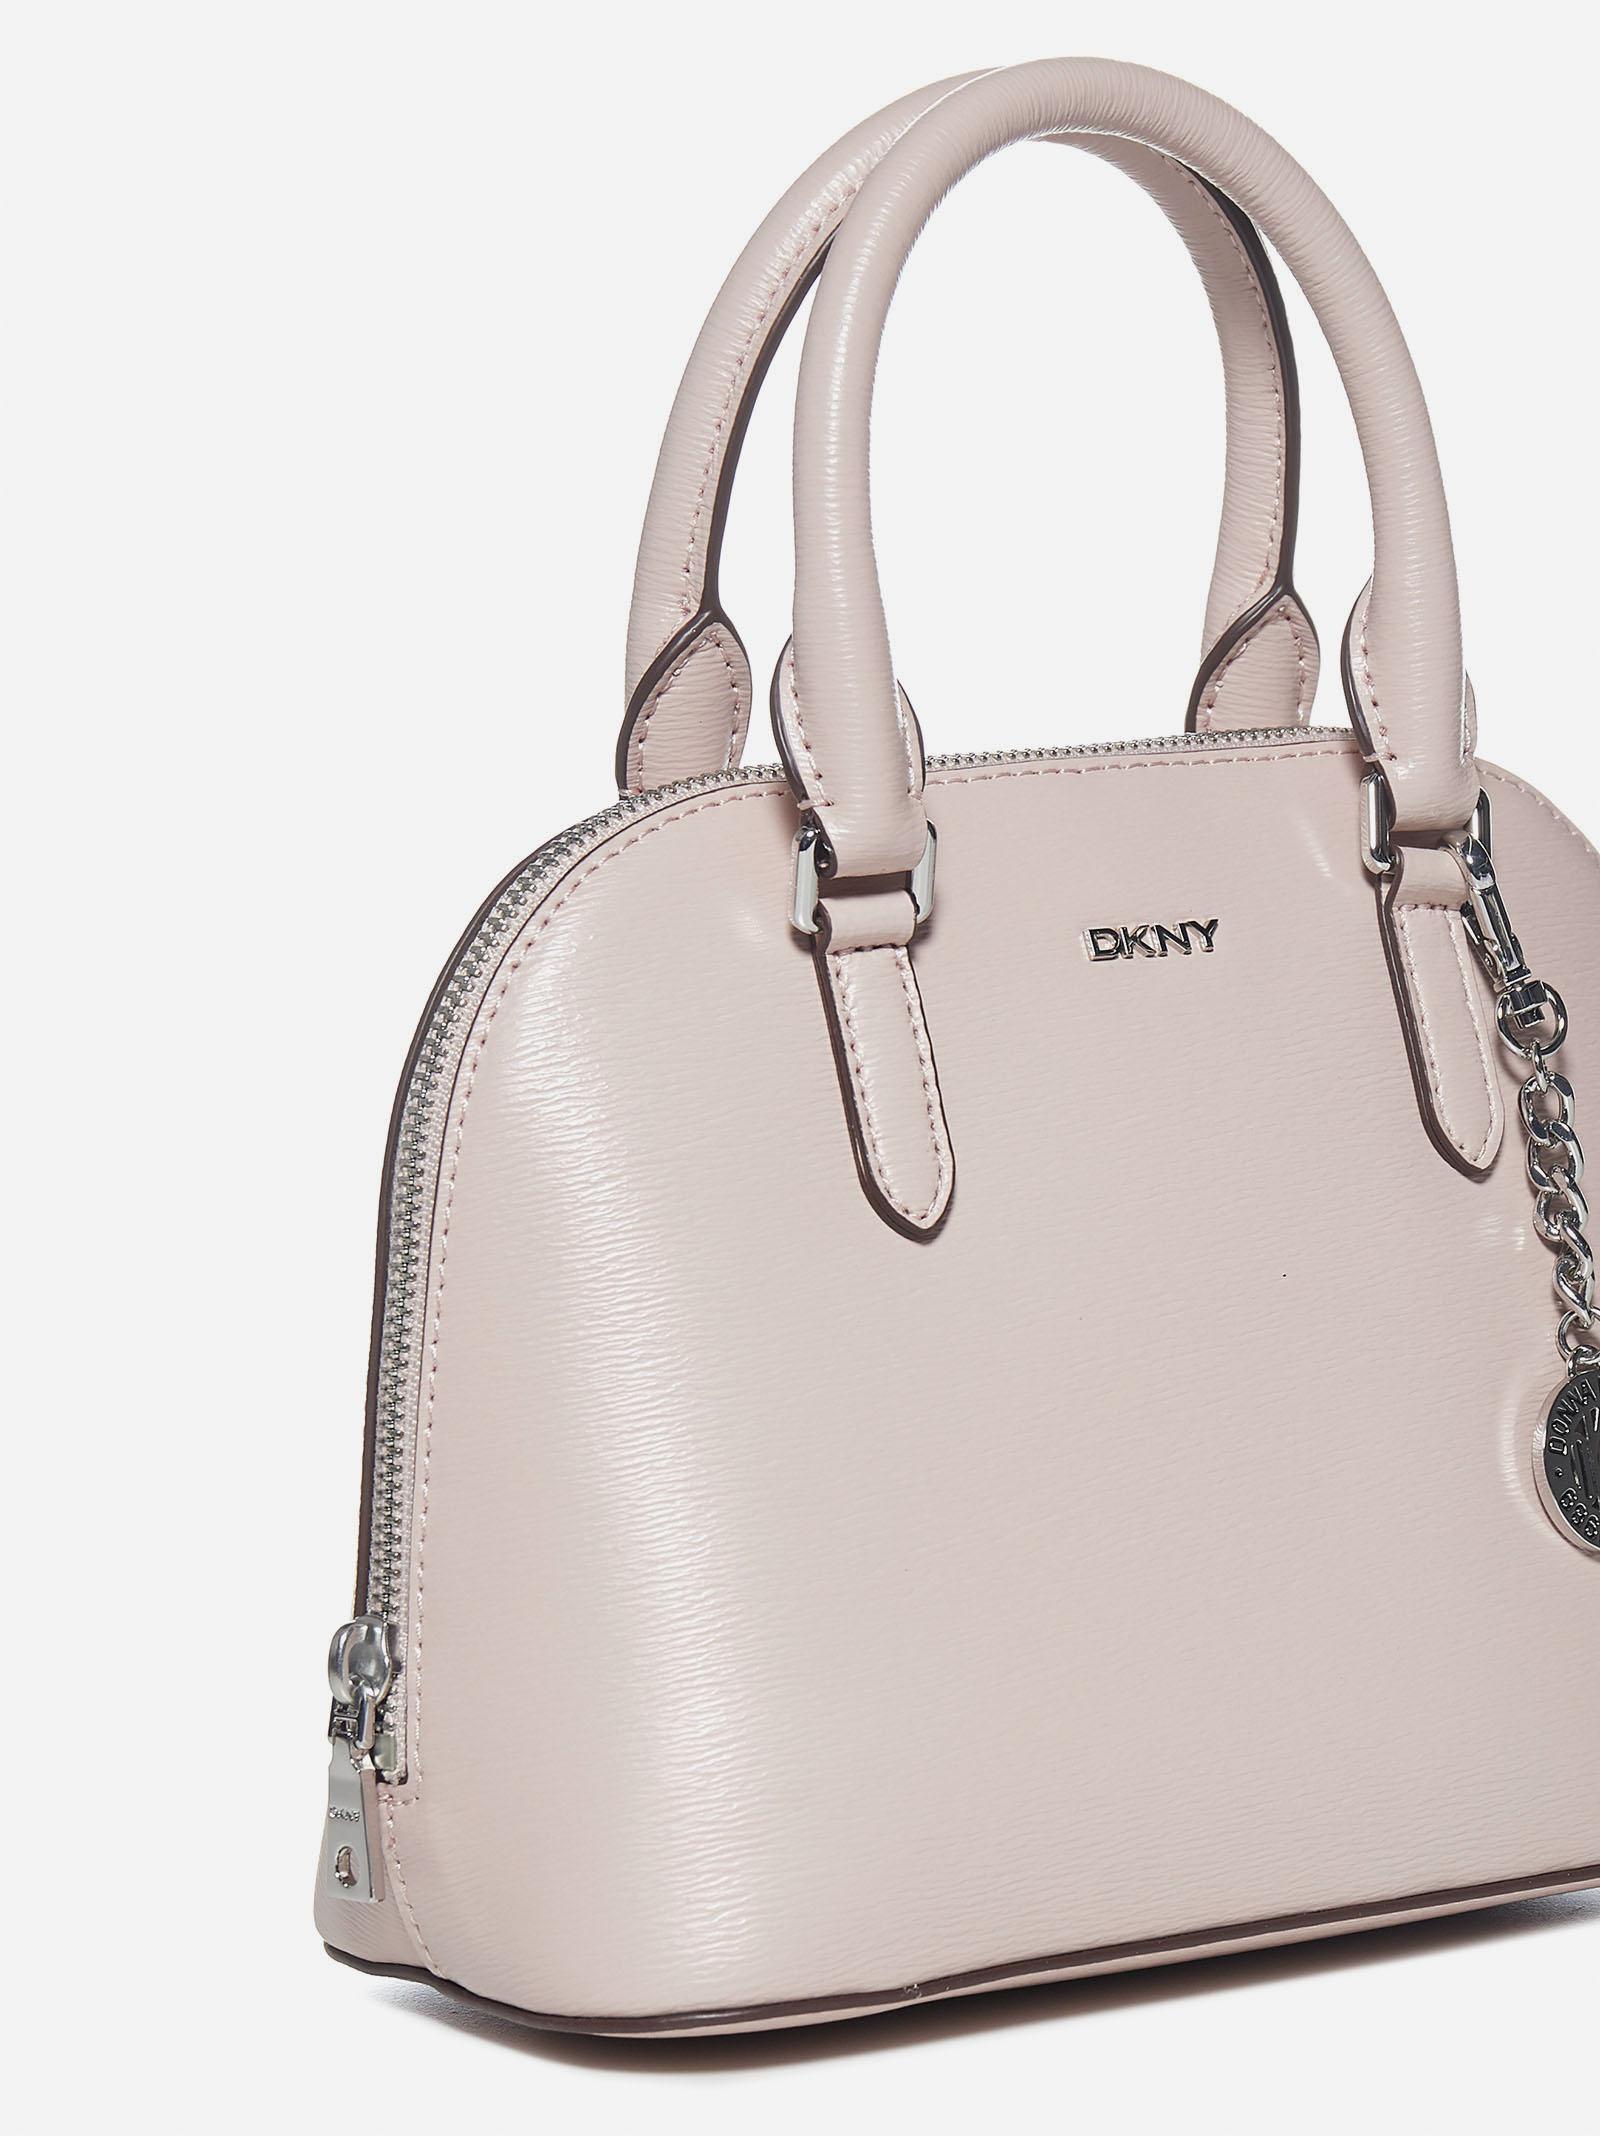 DKNY Bryant Dome Leather Satchel Bag | Lyst